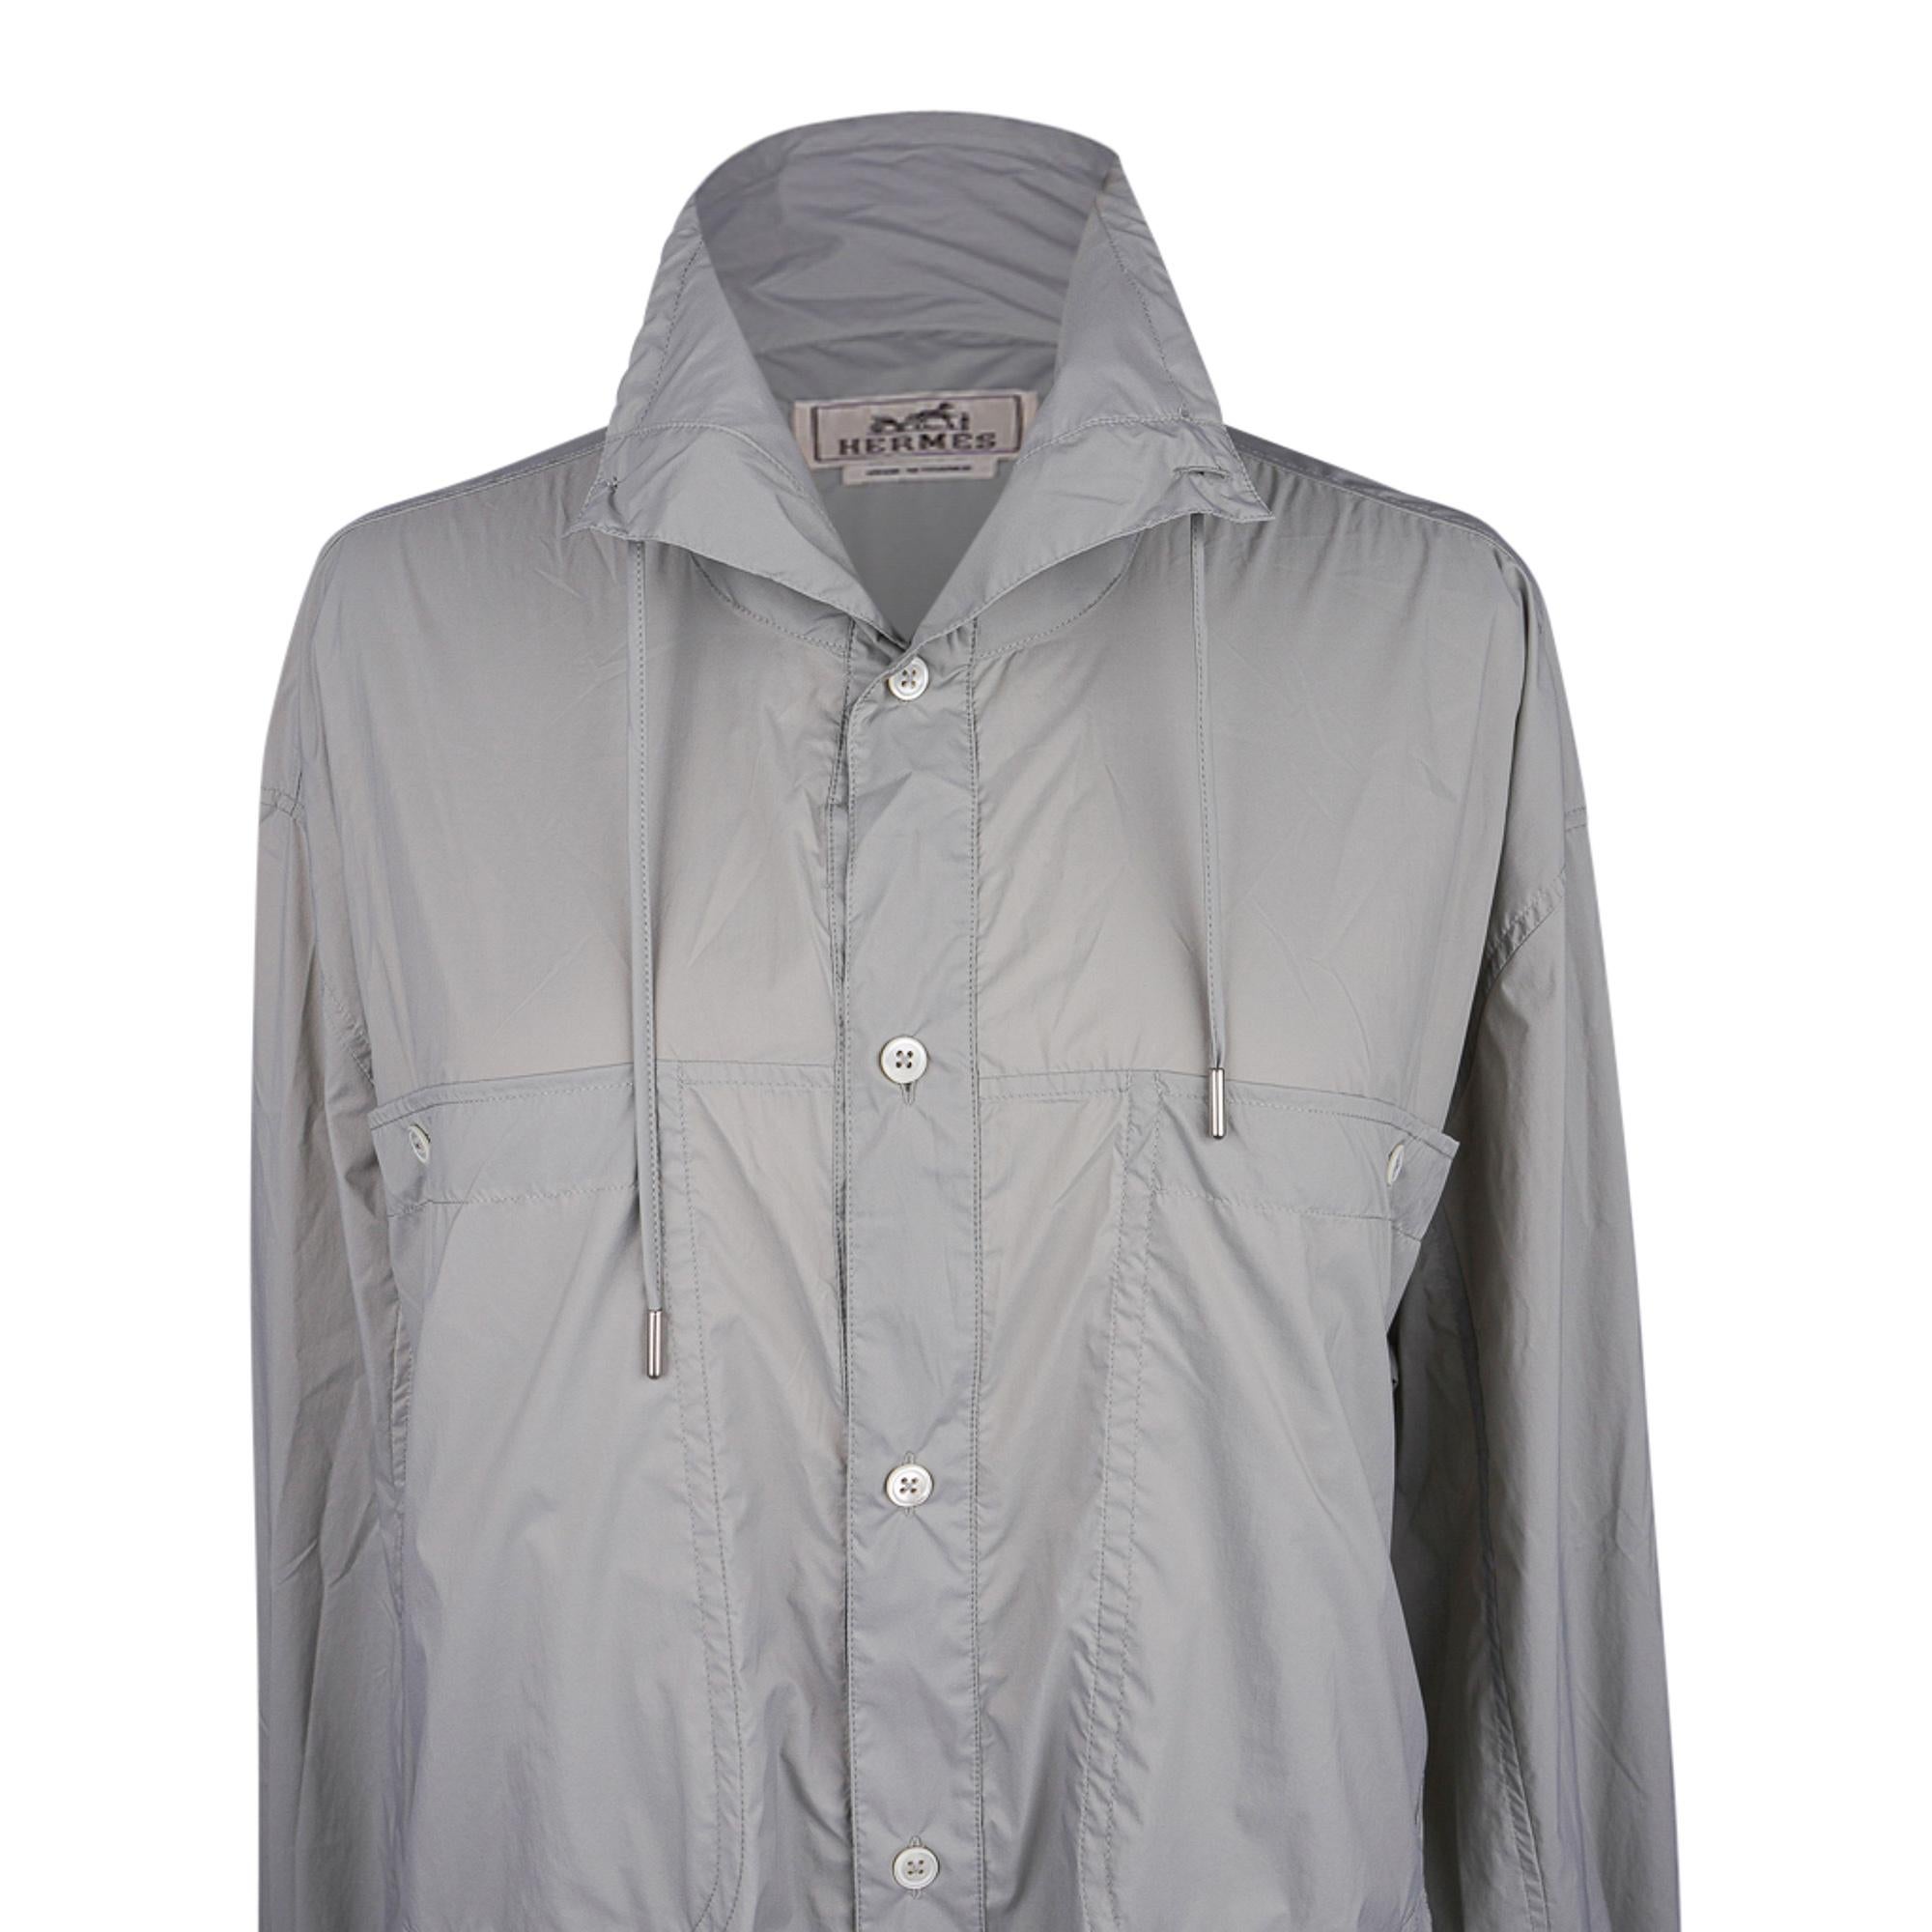 Mightychic offers an Hermes men's very lightweight technical overshirt featured in Acier.
Drawstring high collar and two front large pockets with buttons.
Two slot side pockets.
Clou de Selle buttons at cuffs.
Fabric is polyurethane.  Feather